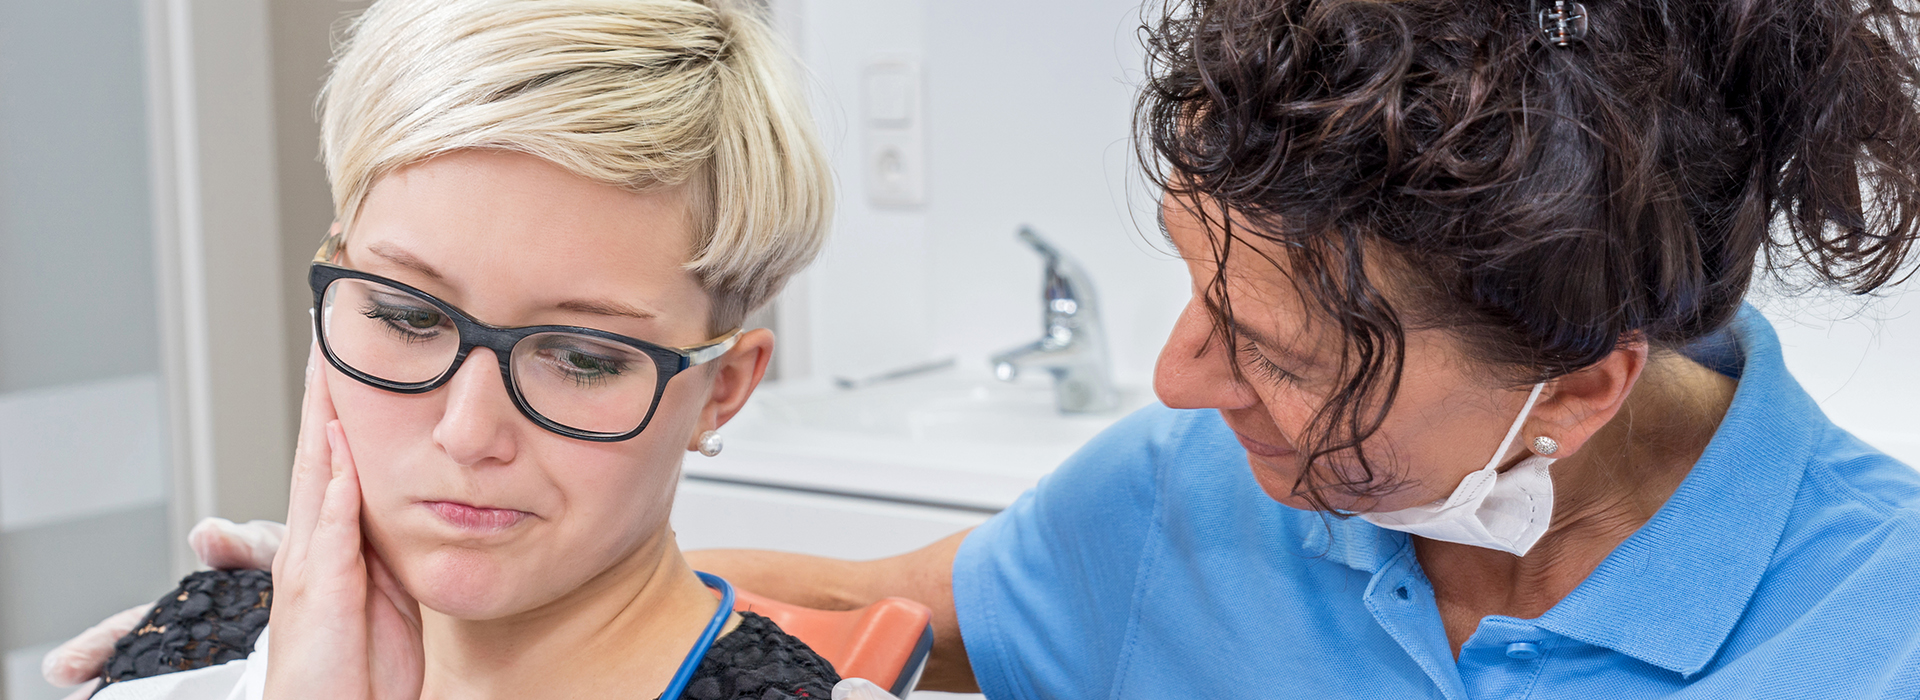 A woman with glasses is receiving a dental cleaning from a dentist, showcasing a professional dental care setting.